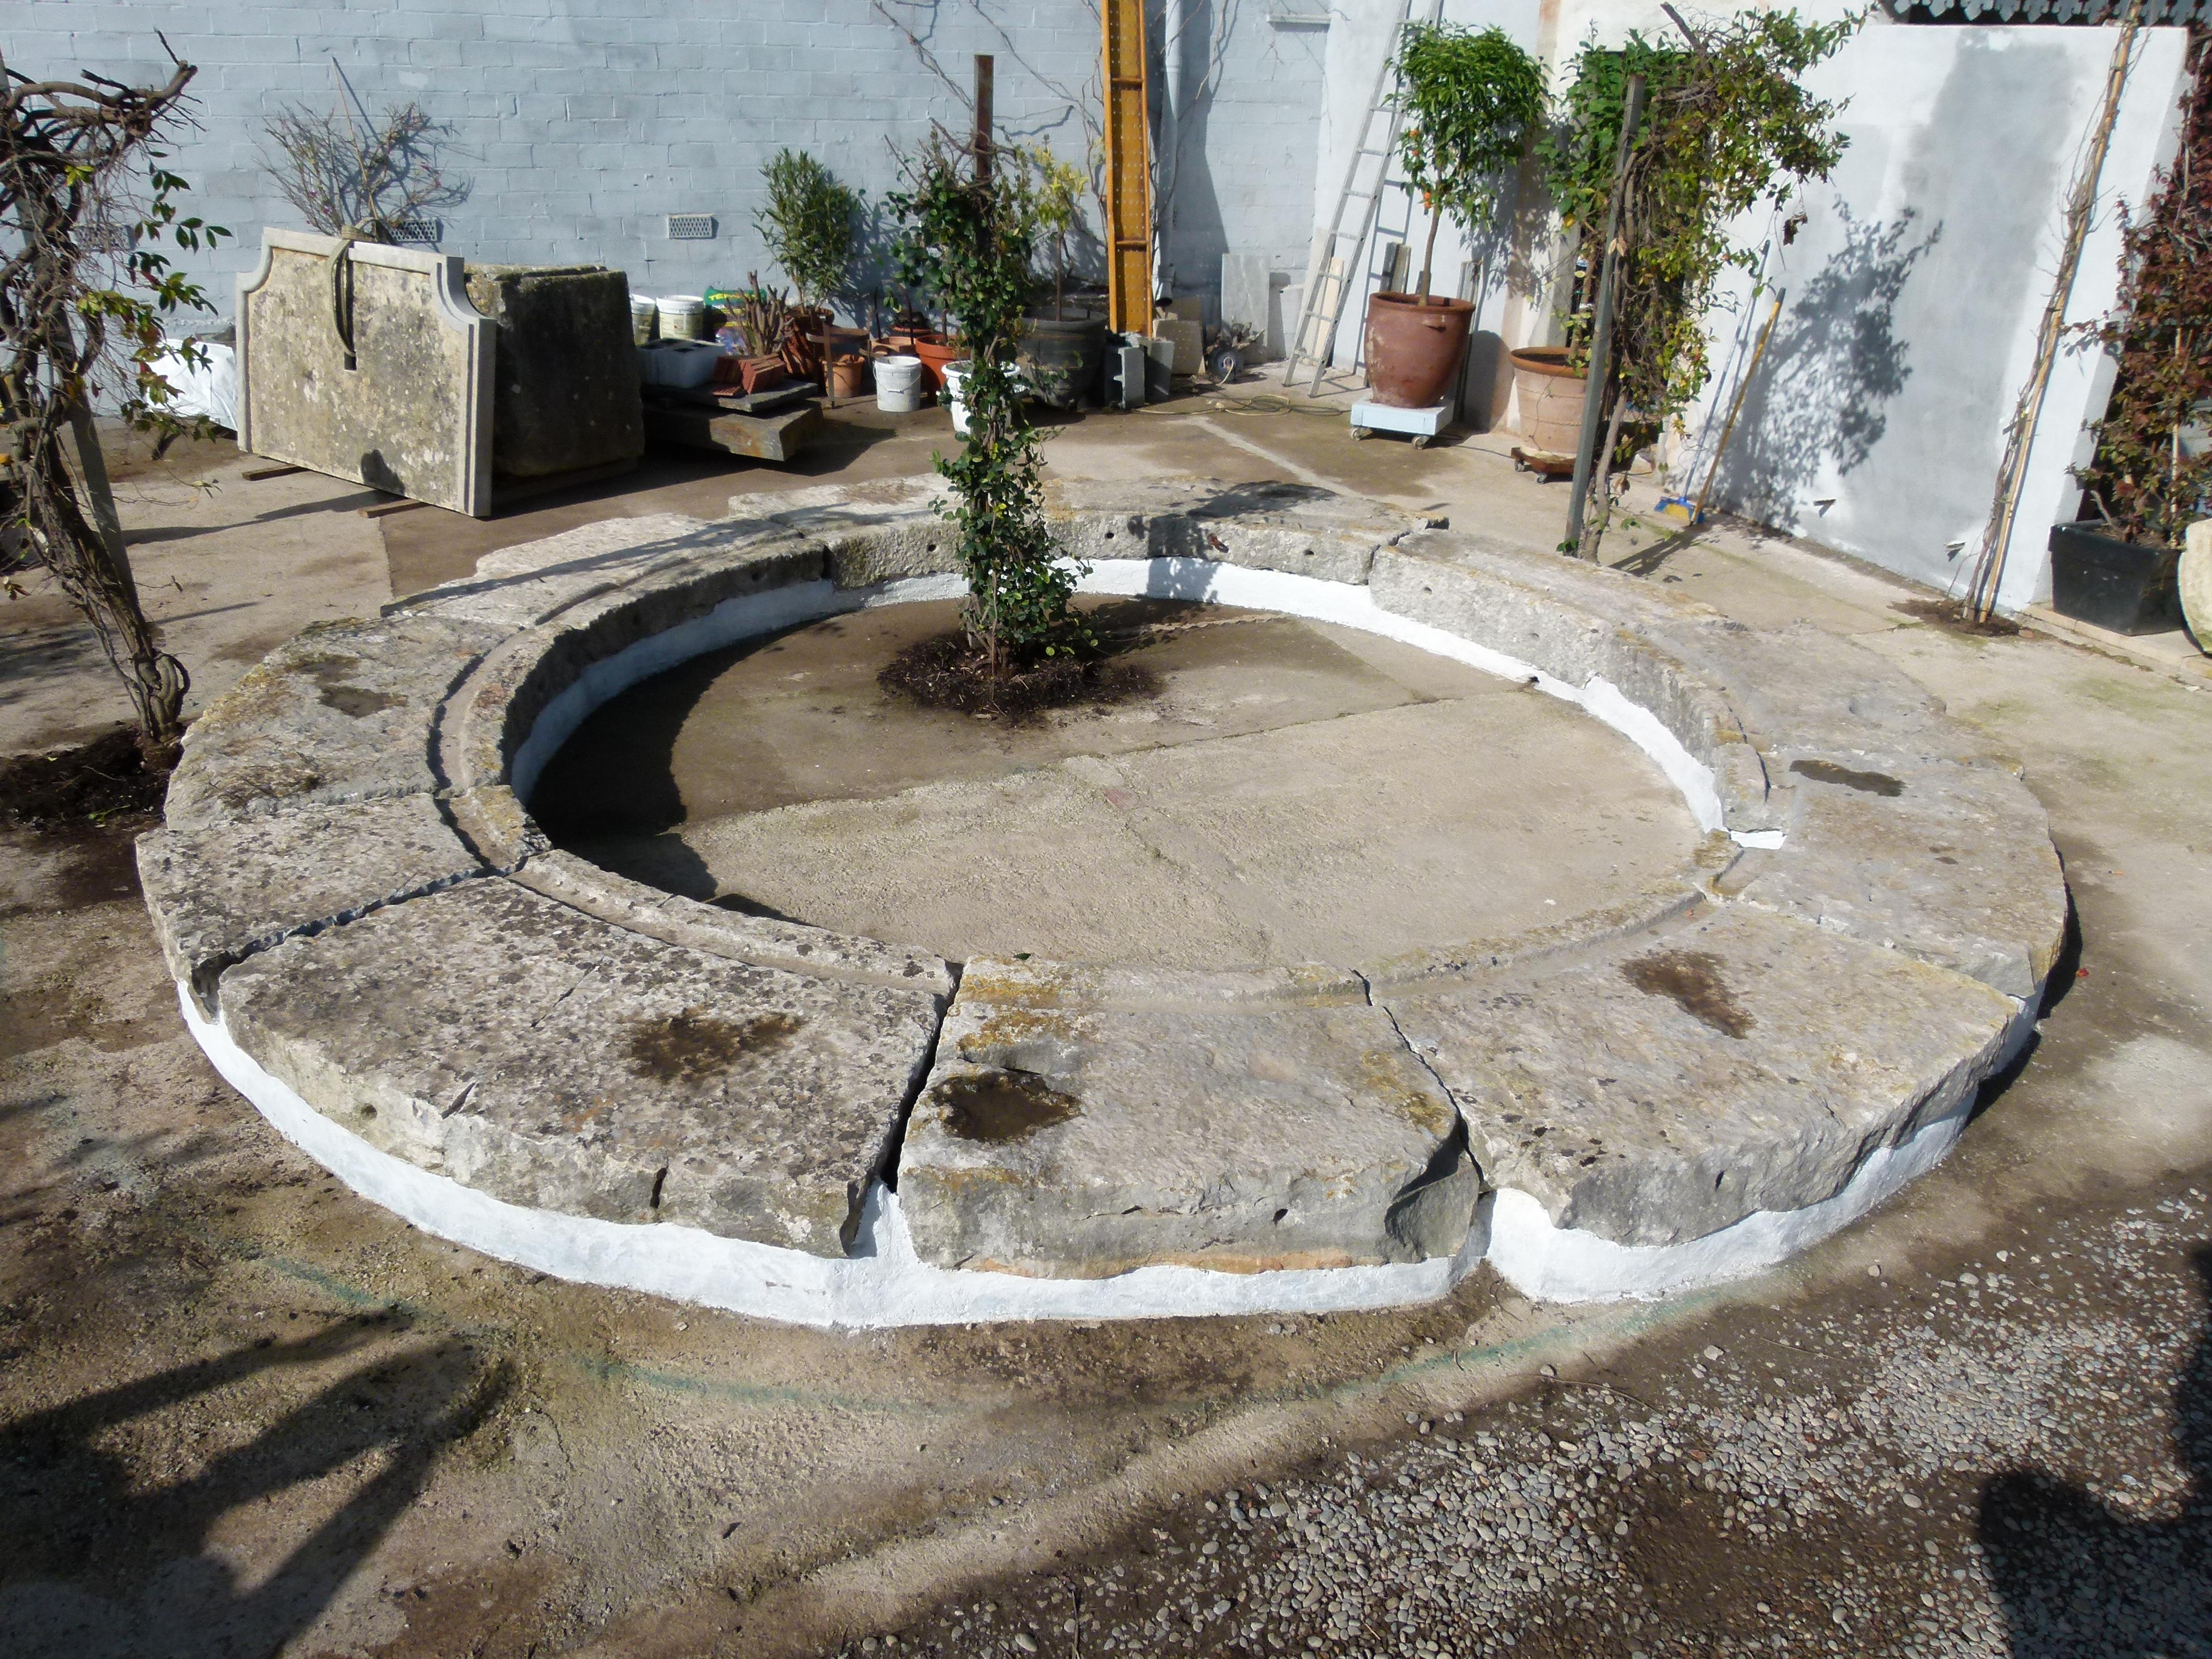 Fountain created with 18th century limestone original from a Flour Mill in Spain.
Ideal for parks o public spaces due to its large dimension

Measurement:
Exterior perimeter 6m. diameter (236.22 in)
Interior perimeter 4 m. diameter (157.48